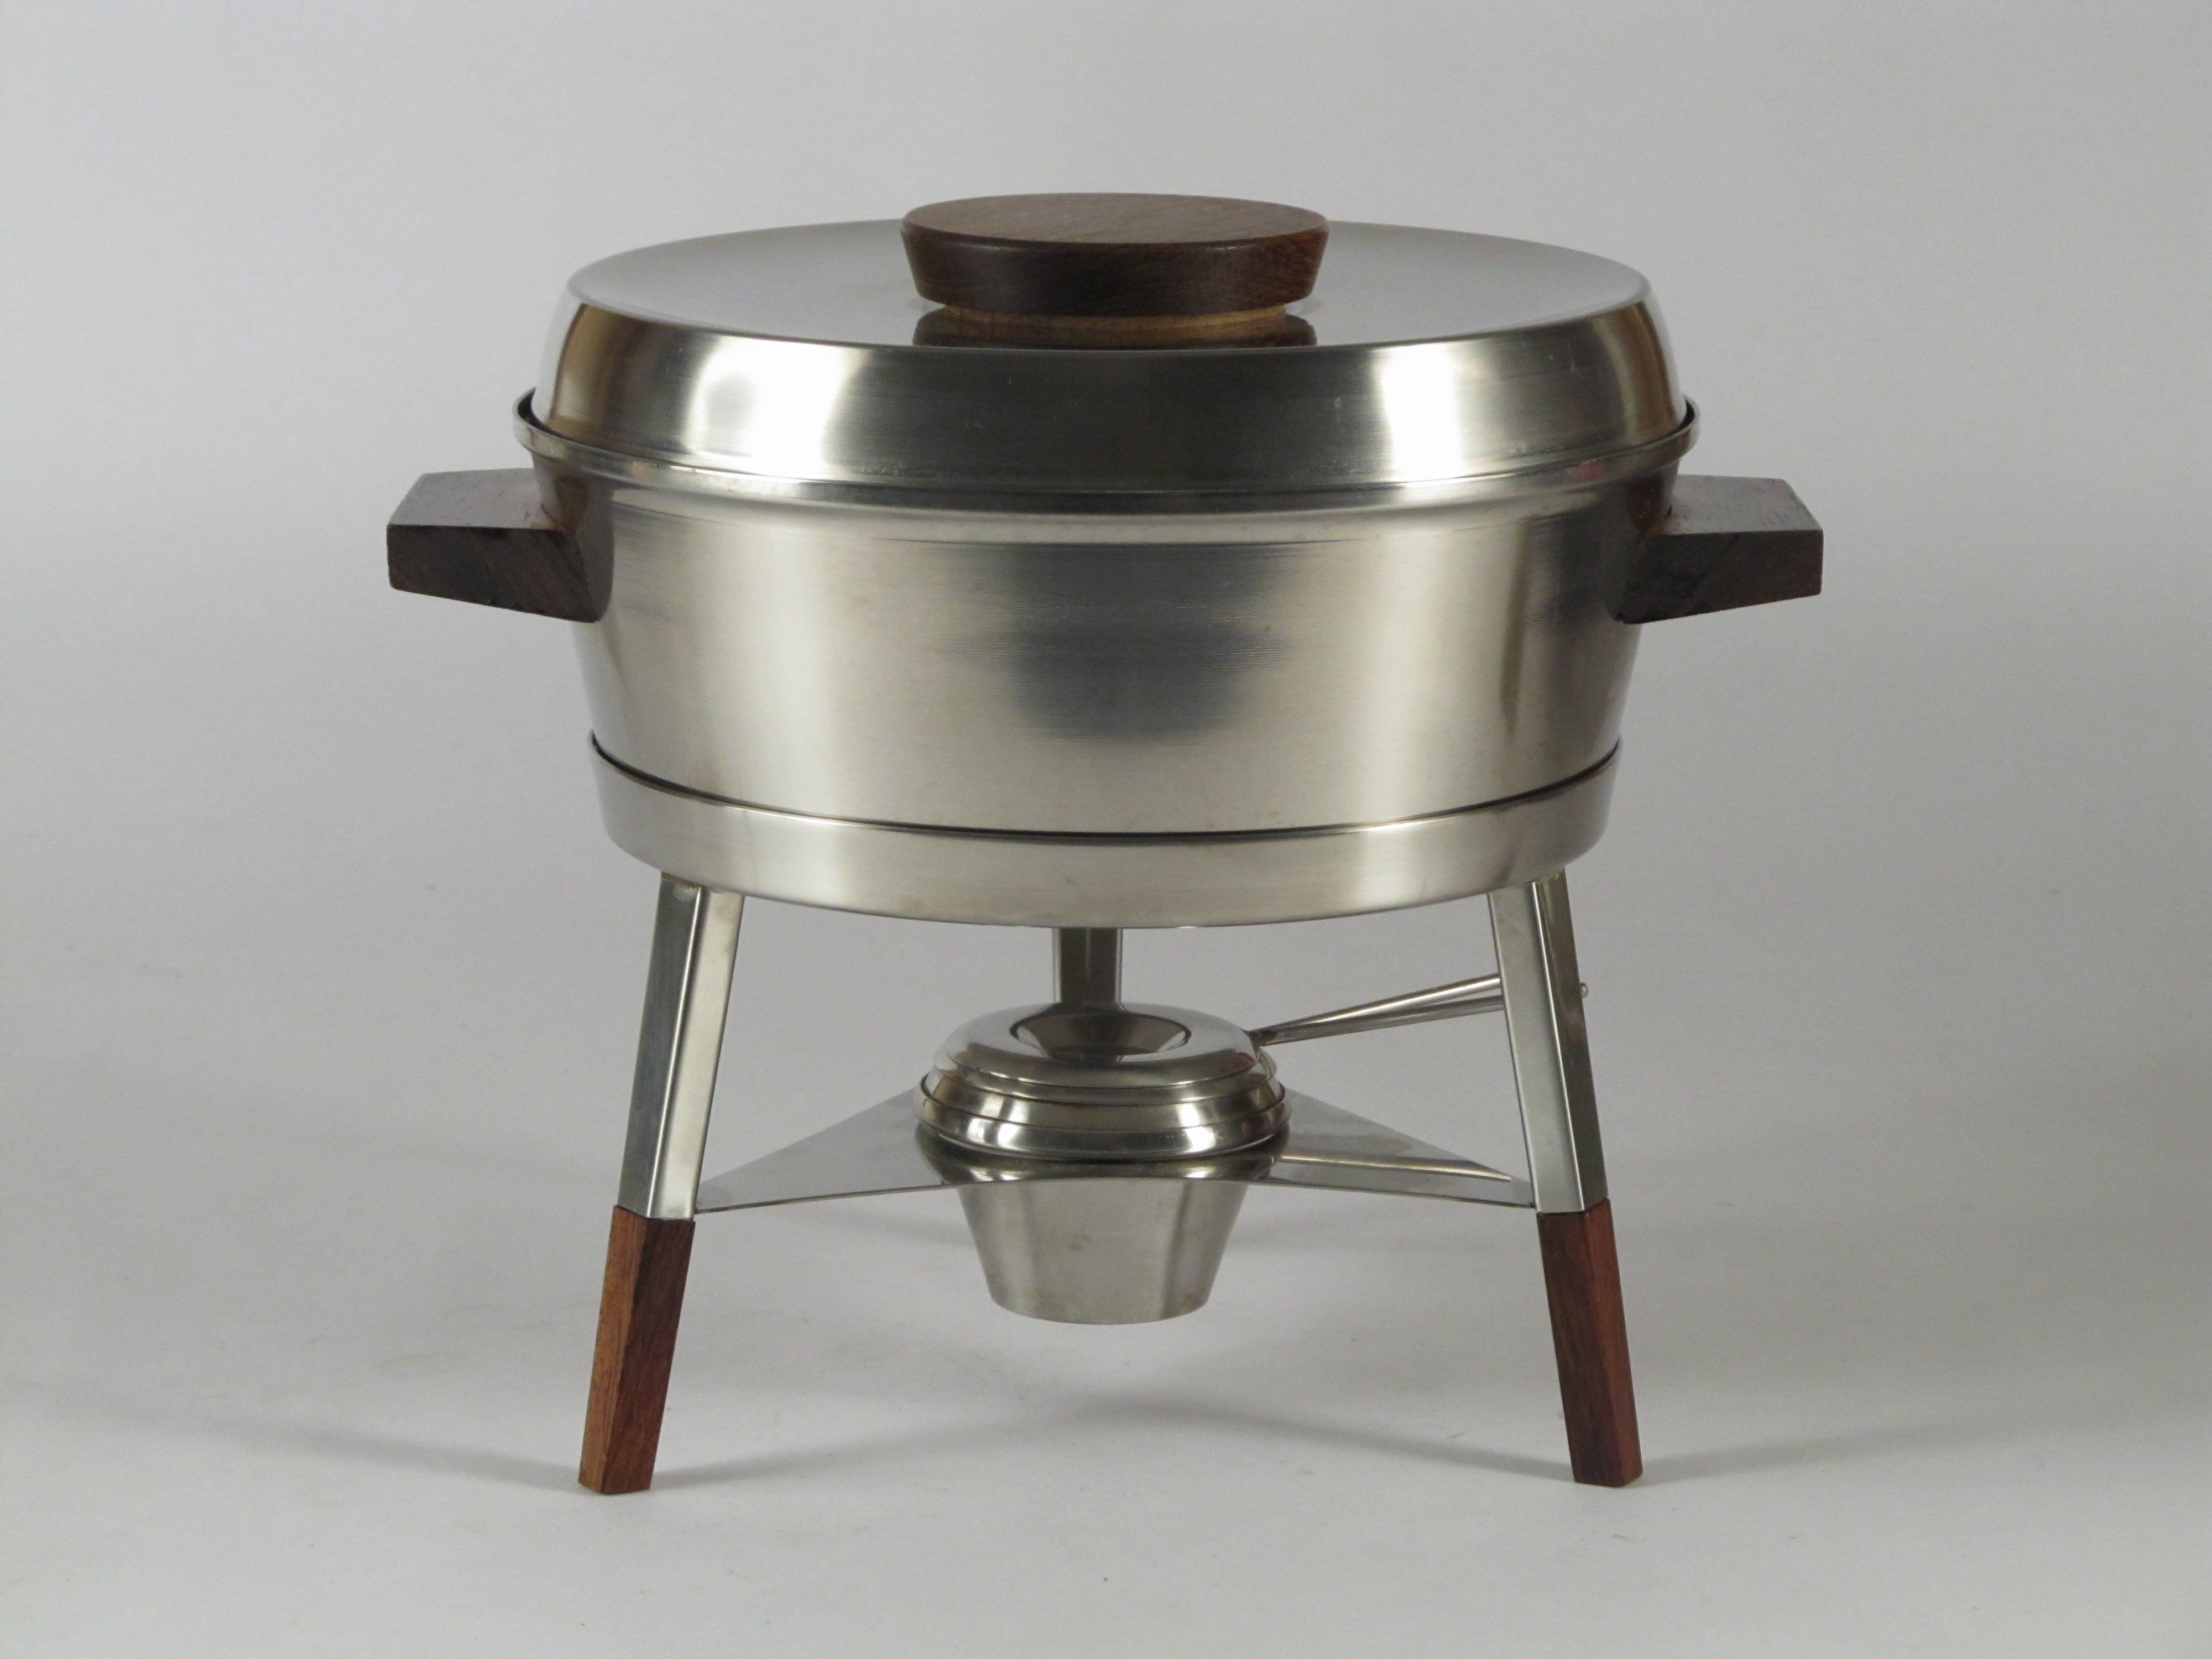 Stelton Stainless Steel and Rosewood Chafing Dish